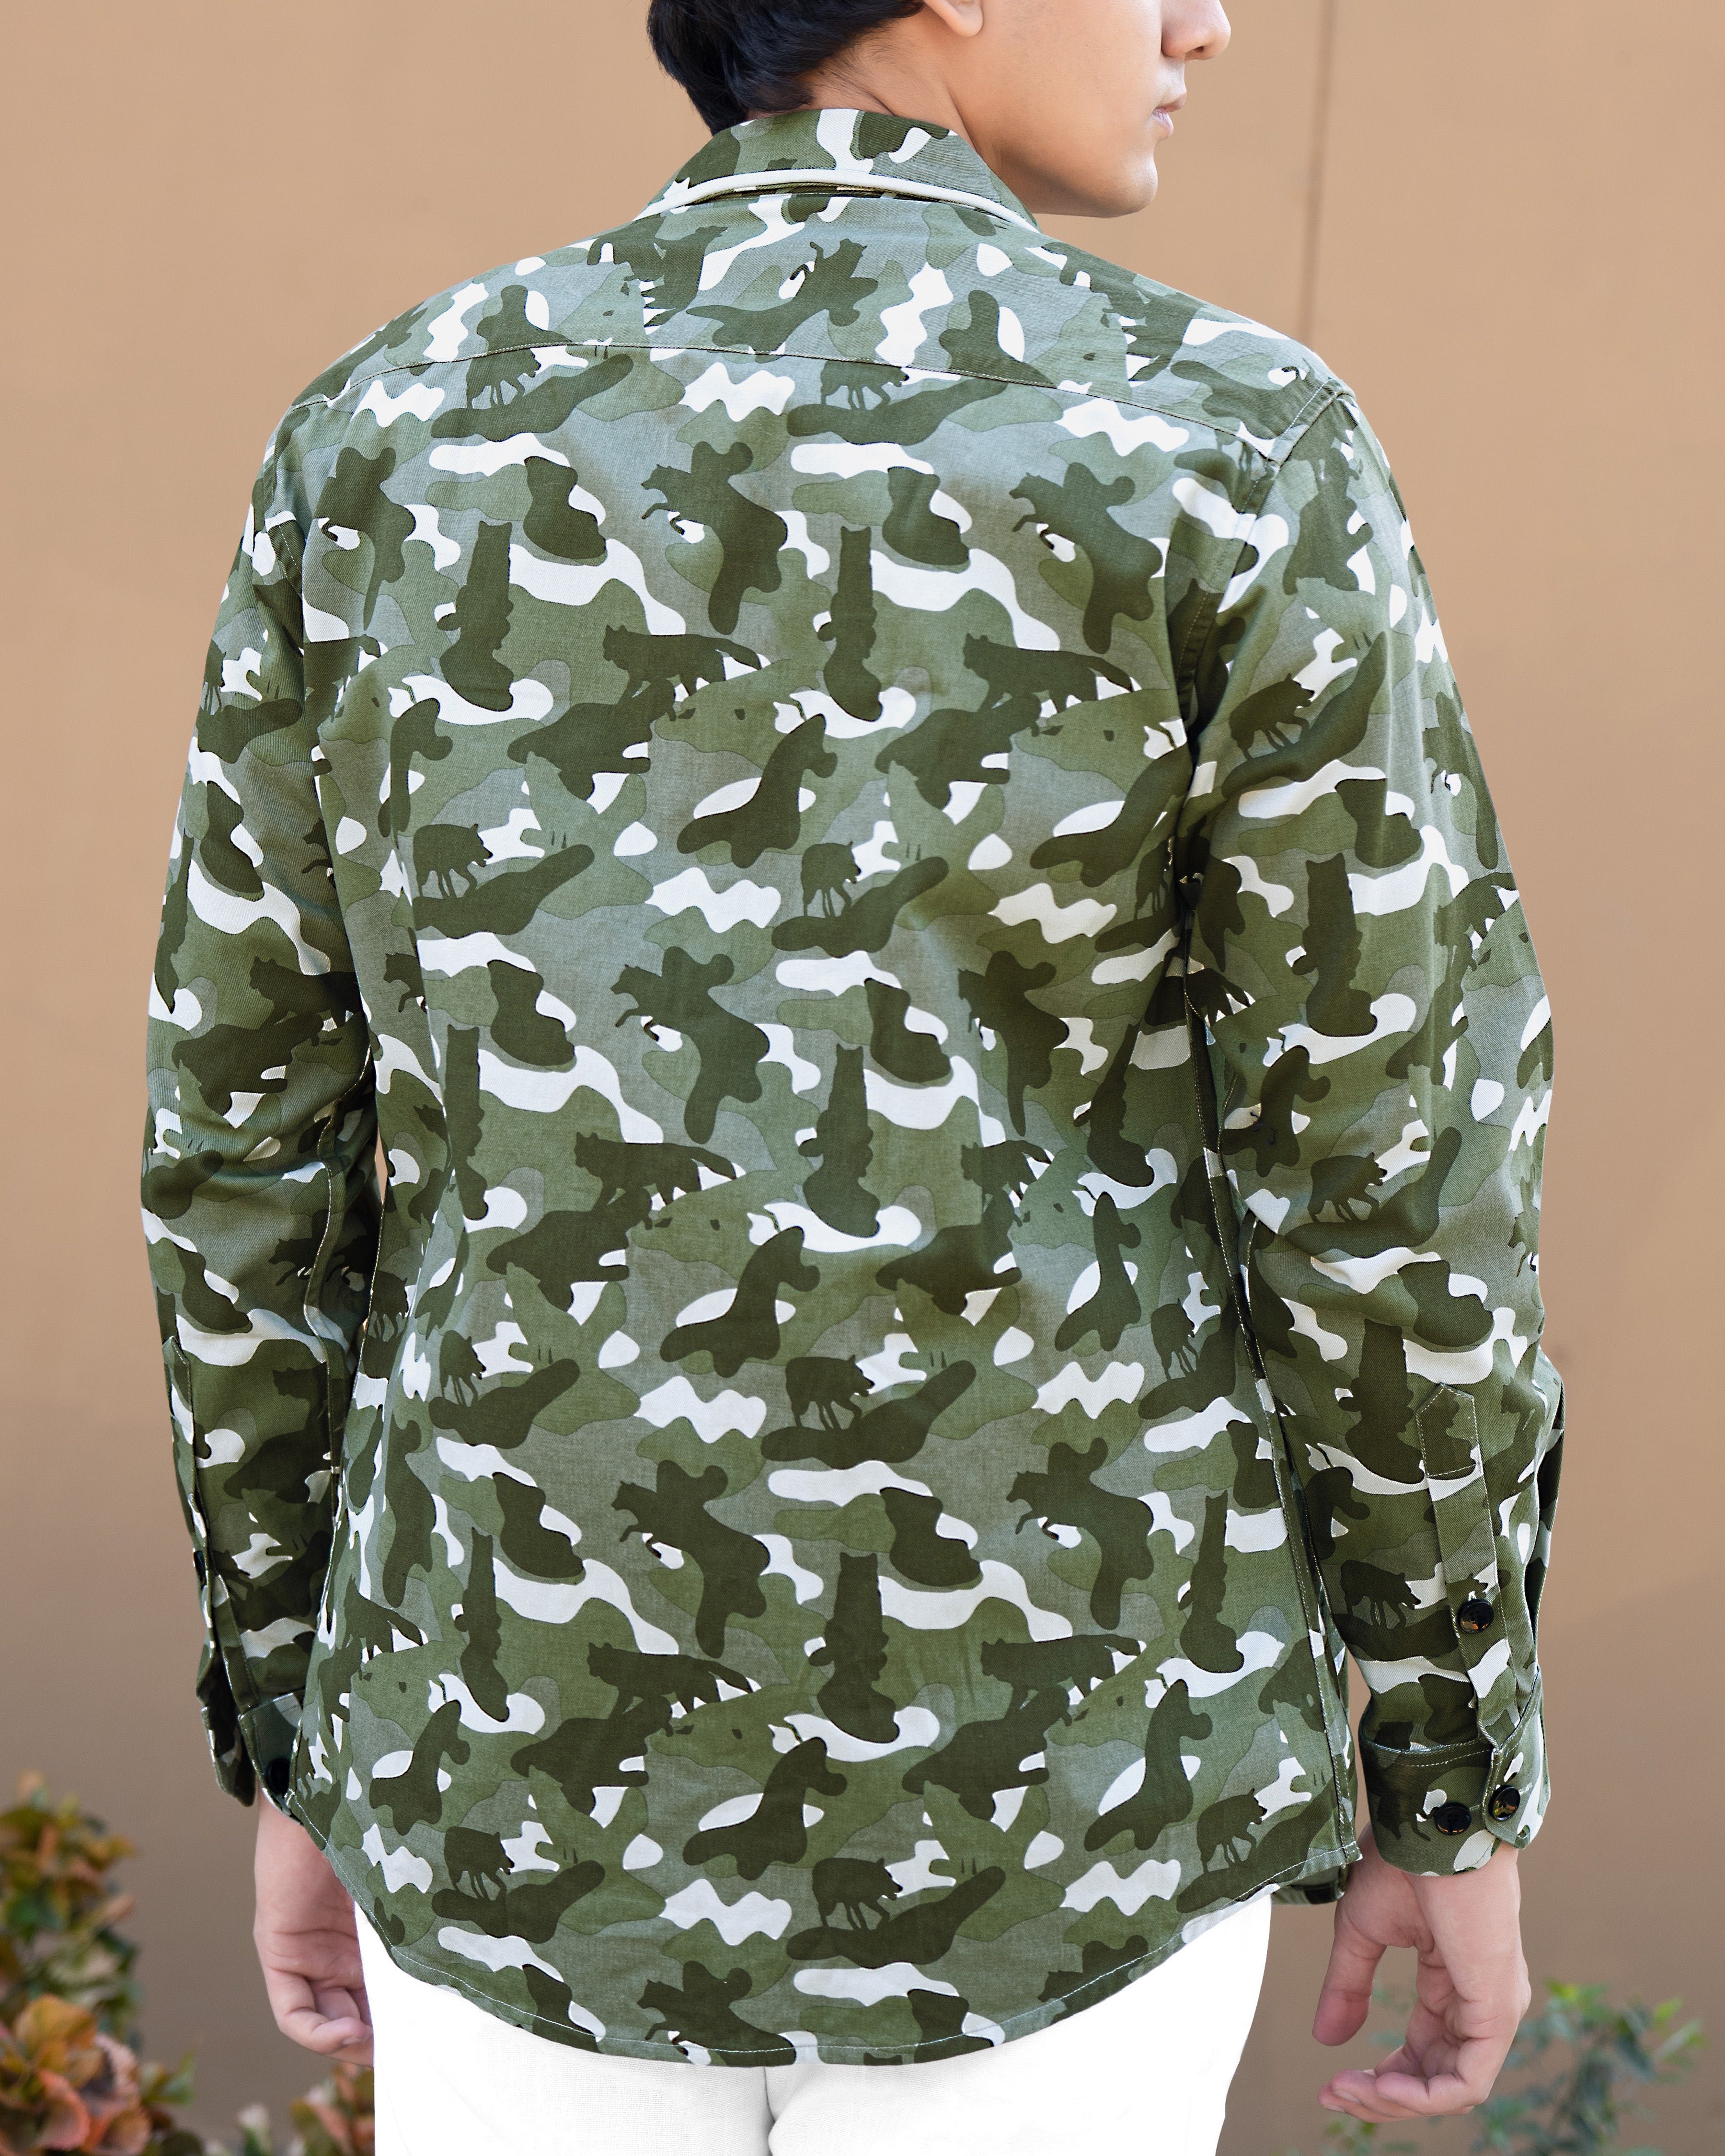 Oyster with Cactus Green Camouflage Royal Oxford Jacket